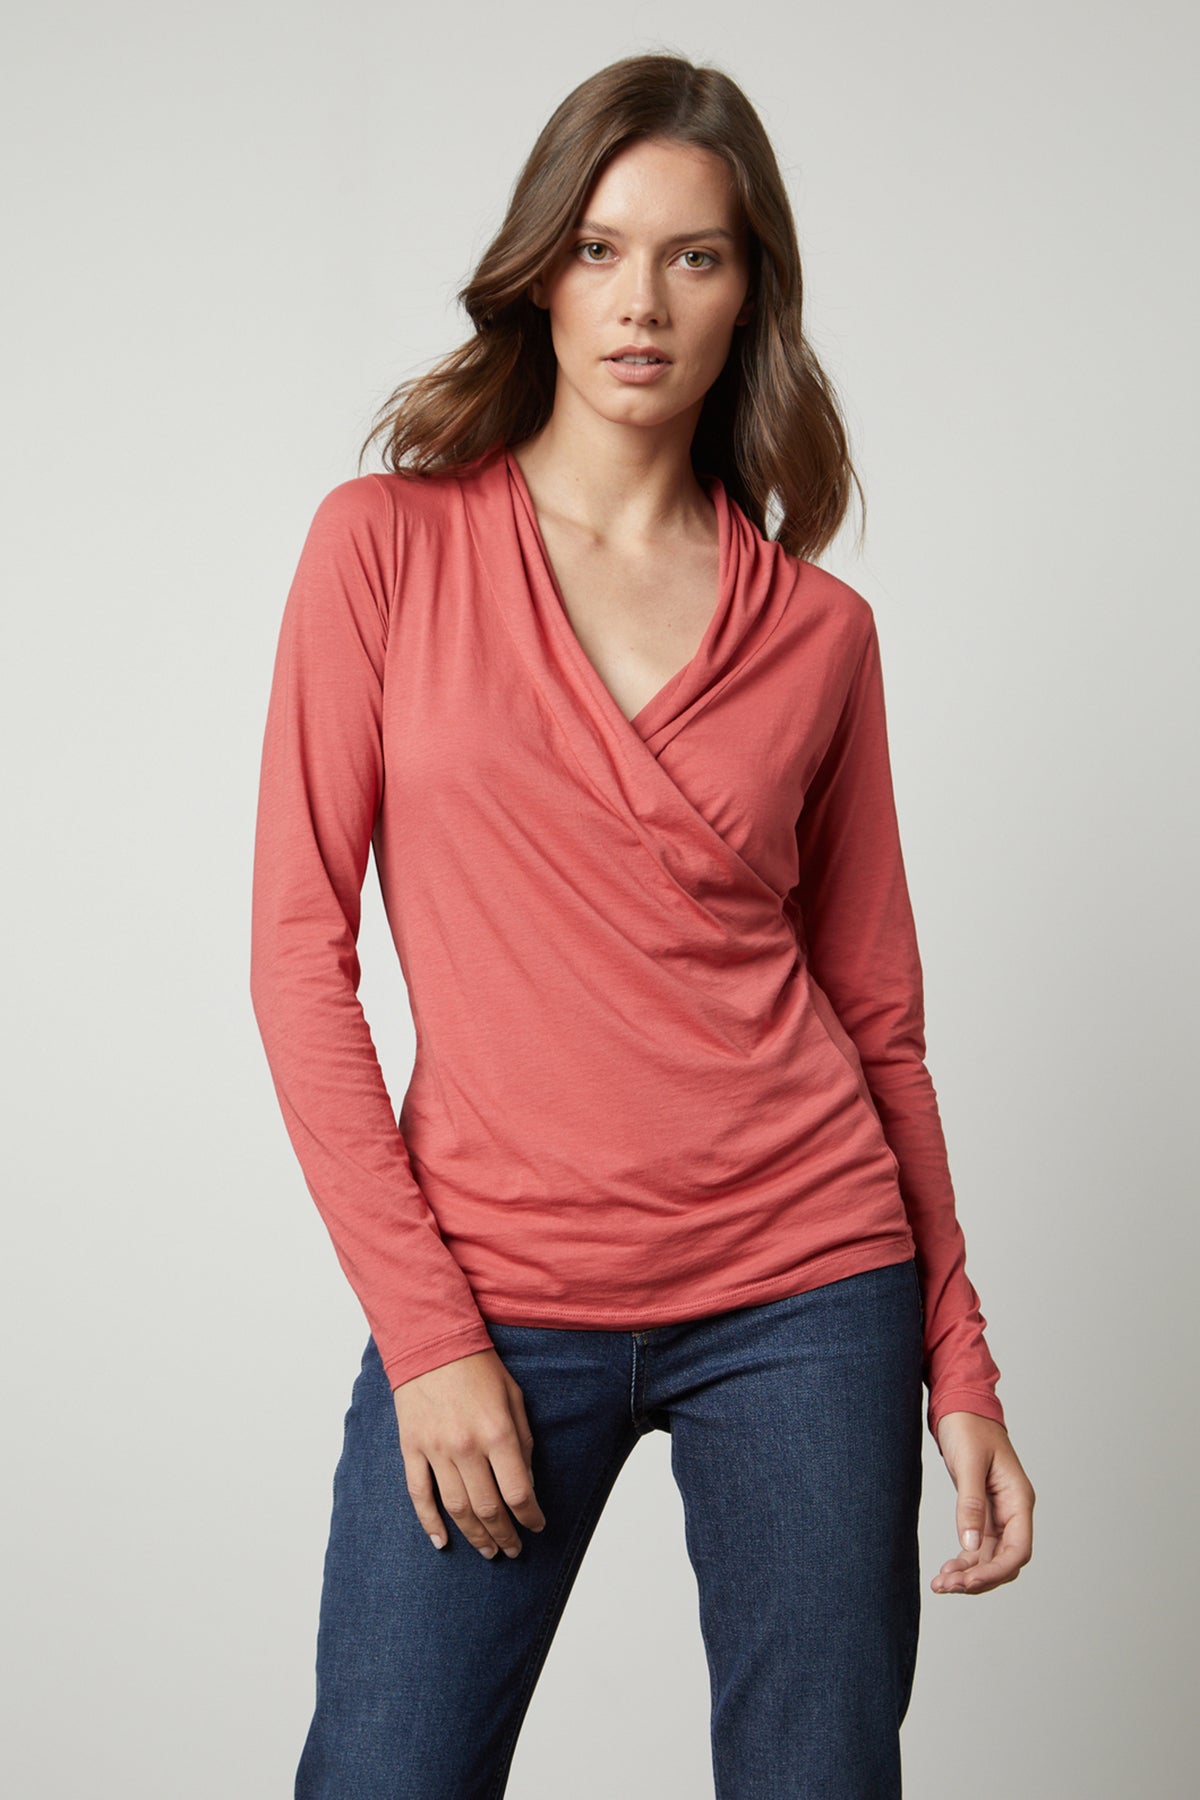 Woman wearing a Velvet by Graham & Spencer MERI WRAP FRONT FITTED TOP, coral long-sleeve top with a cross over v-neck and denim jeans.-36328493252801